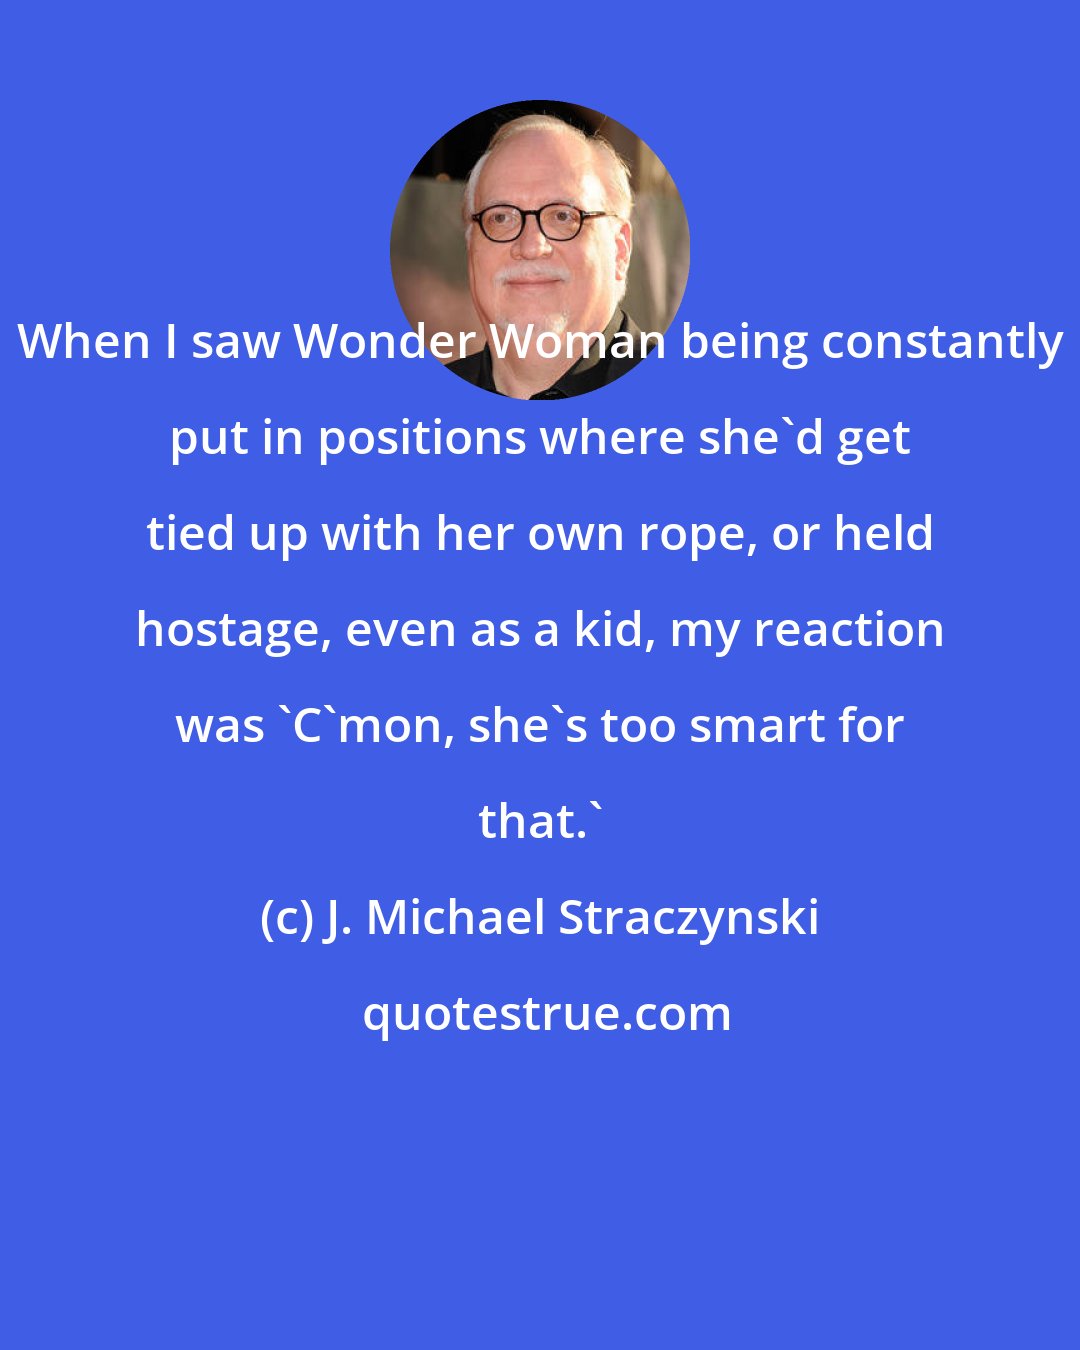 J. Michael Straczynski: When I saw Wonder Woman being constantly put in positions where she'd get tied up with her own rope, or held hostage, even as a kid, my reaction was 'C'mon, she's too smart for that.'